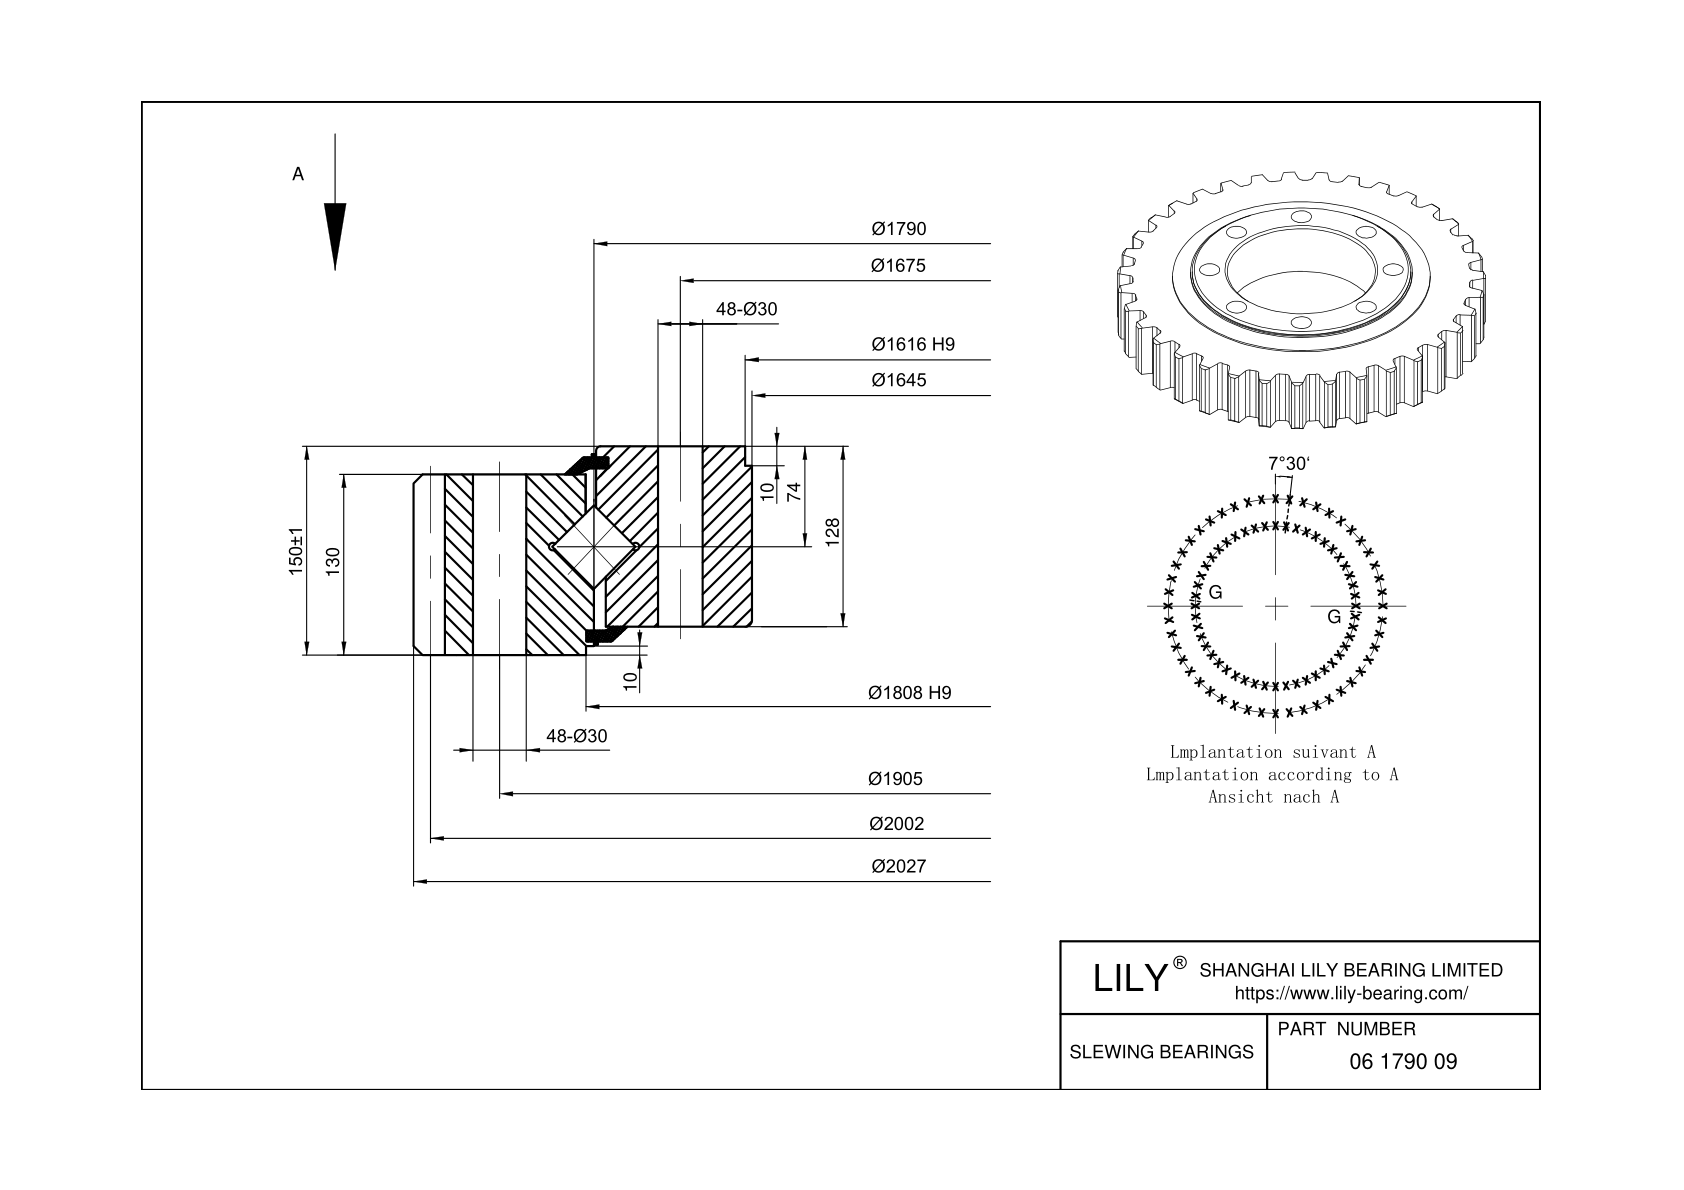 06 1790 09 Cross Roller Slewing Ring Bearing cad drawing